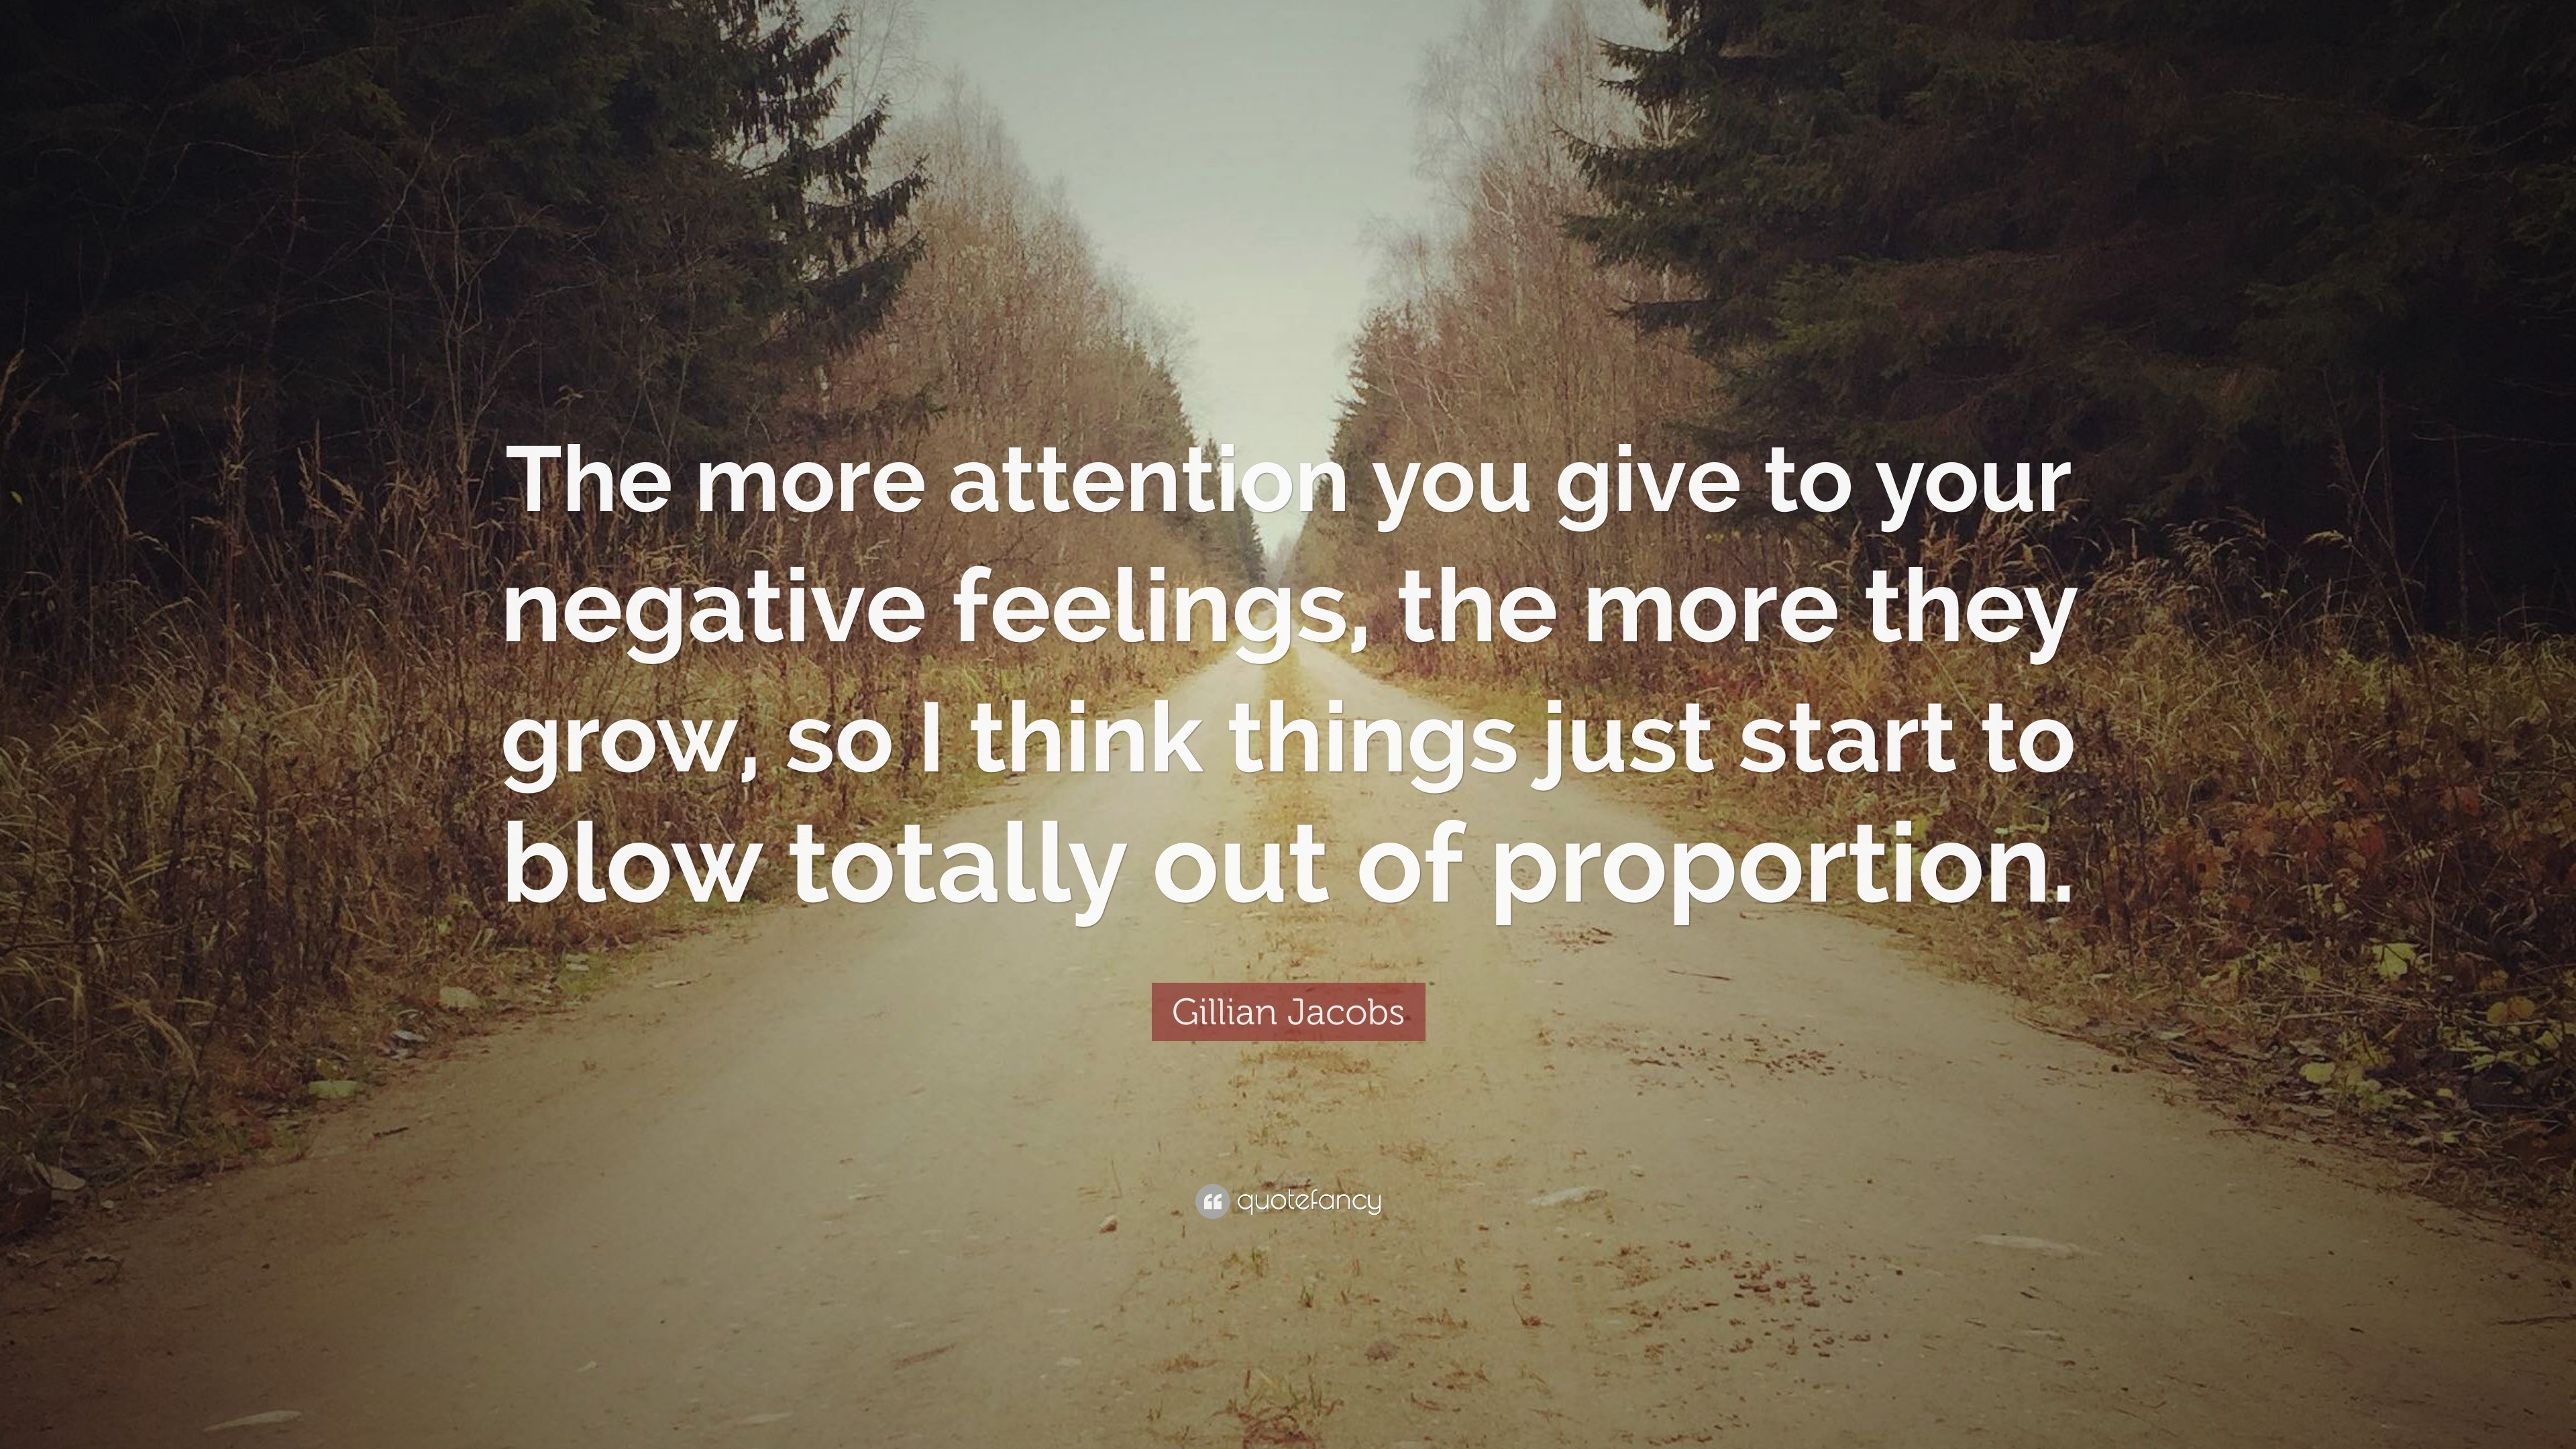 Gillian Jacobs Quote: “The more attention you give to your negative ...